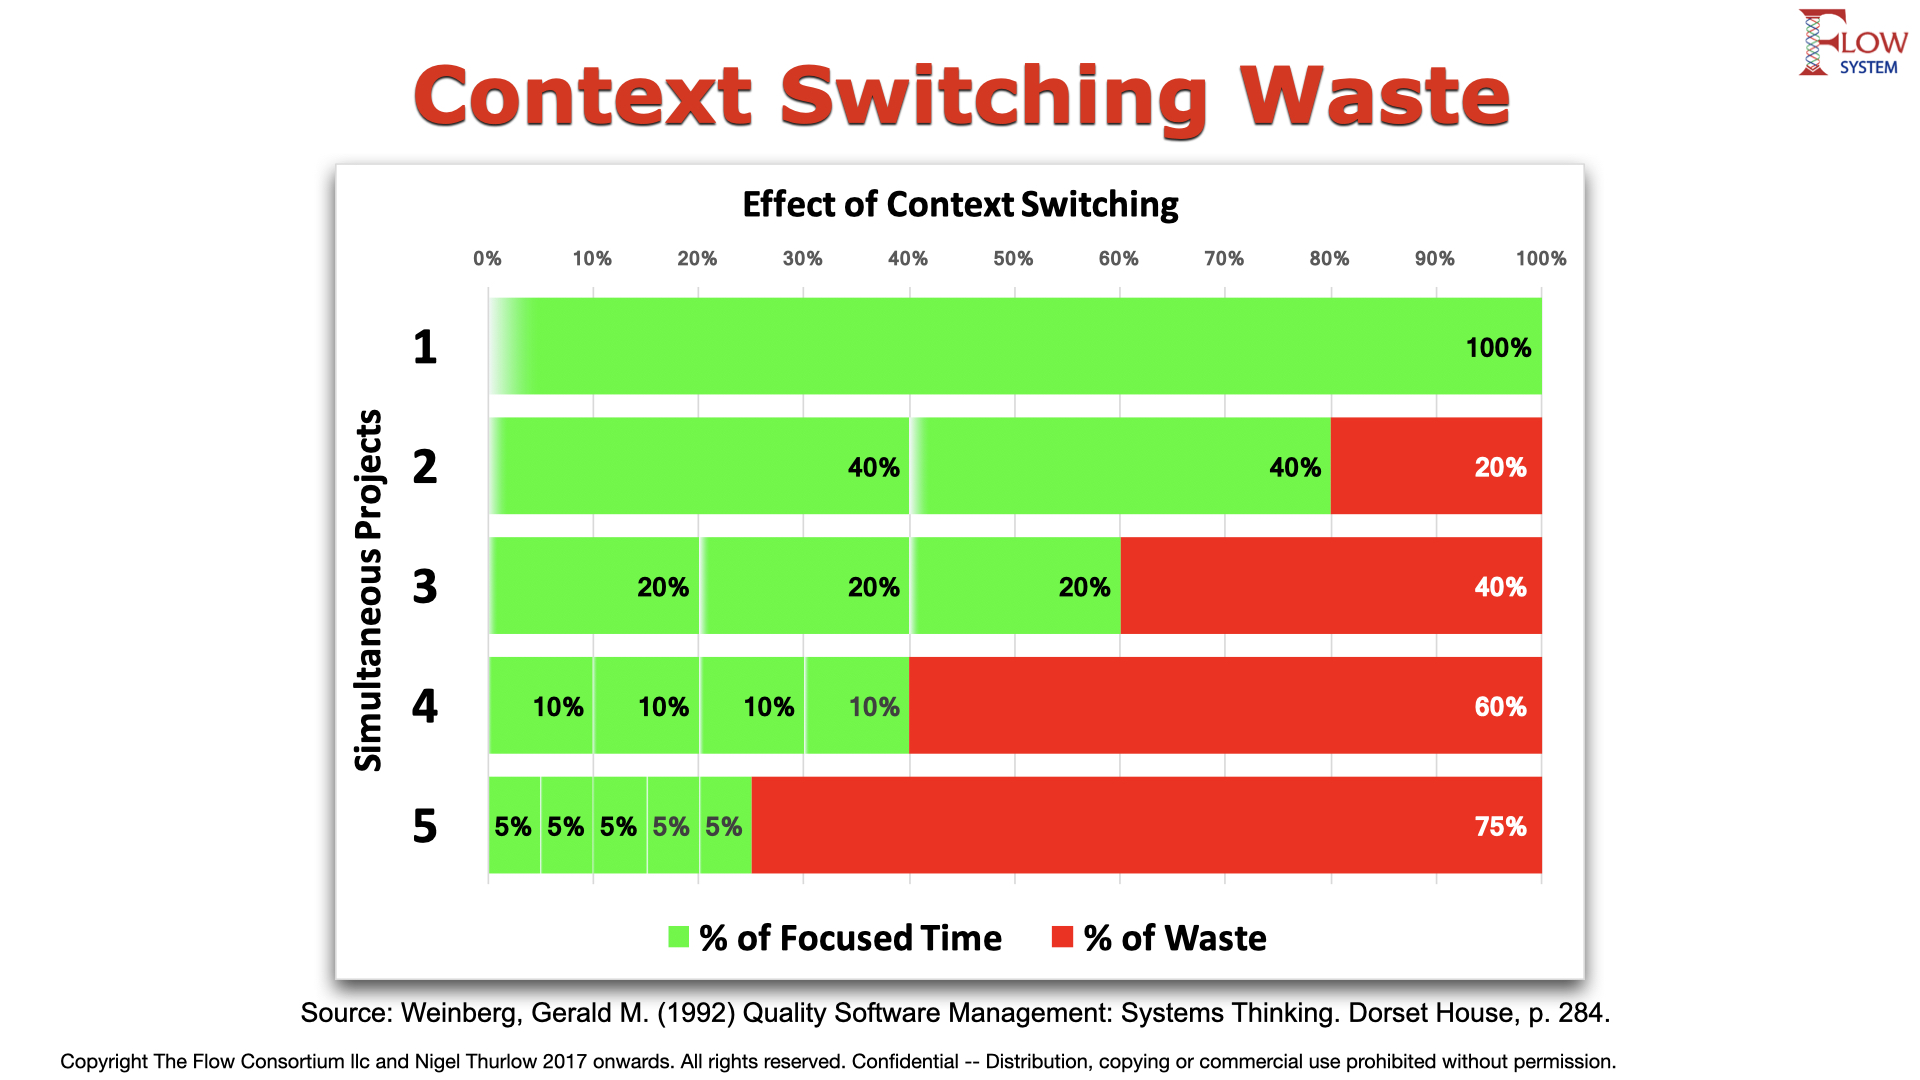 Image describing context switching waste